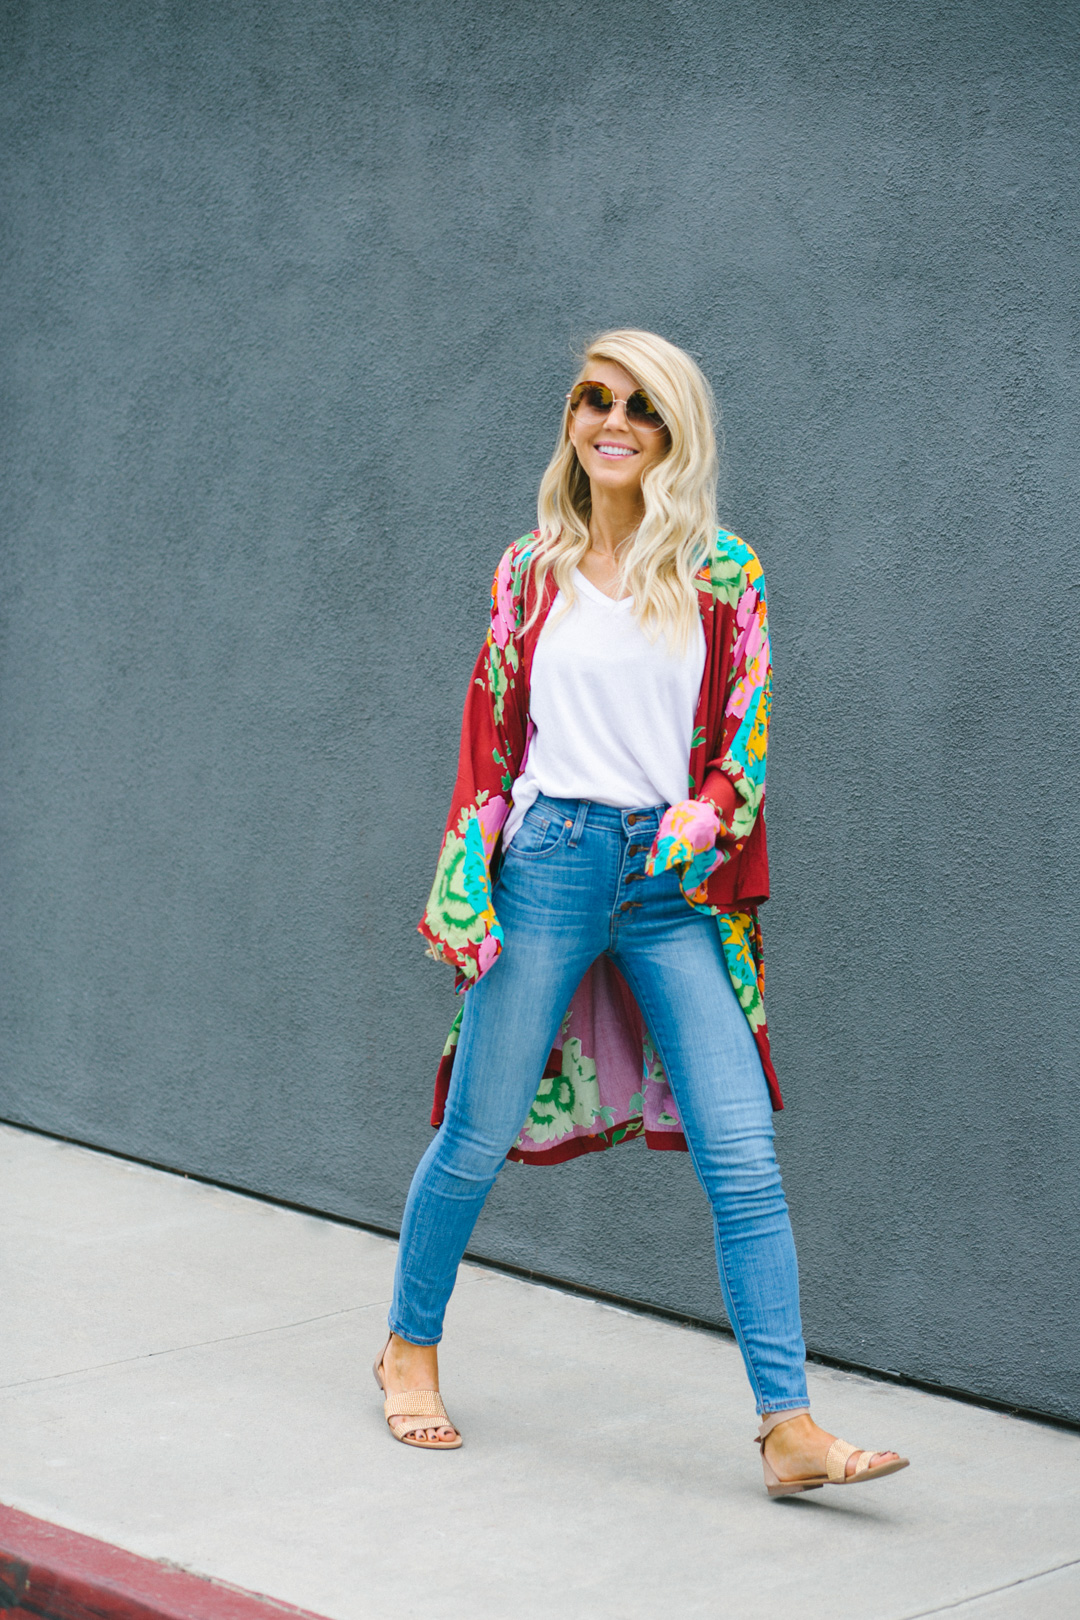 Lisa Allen of Lunchpails and Lipstick Wearing Novella Royale Kimono and Madewell Jeans with Dblanc round sunglasses in Solana Beach, CA 